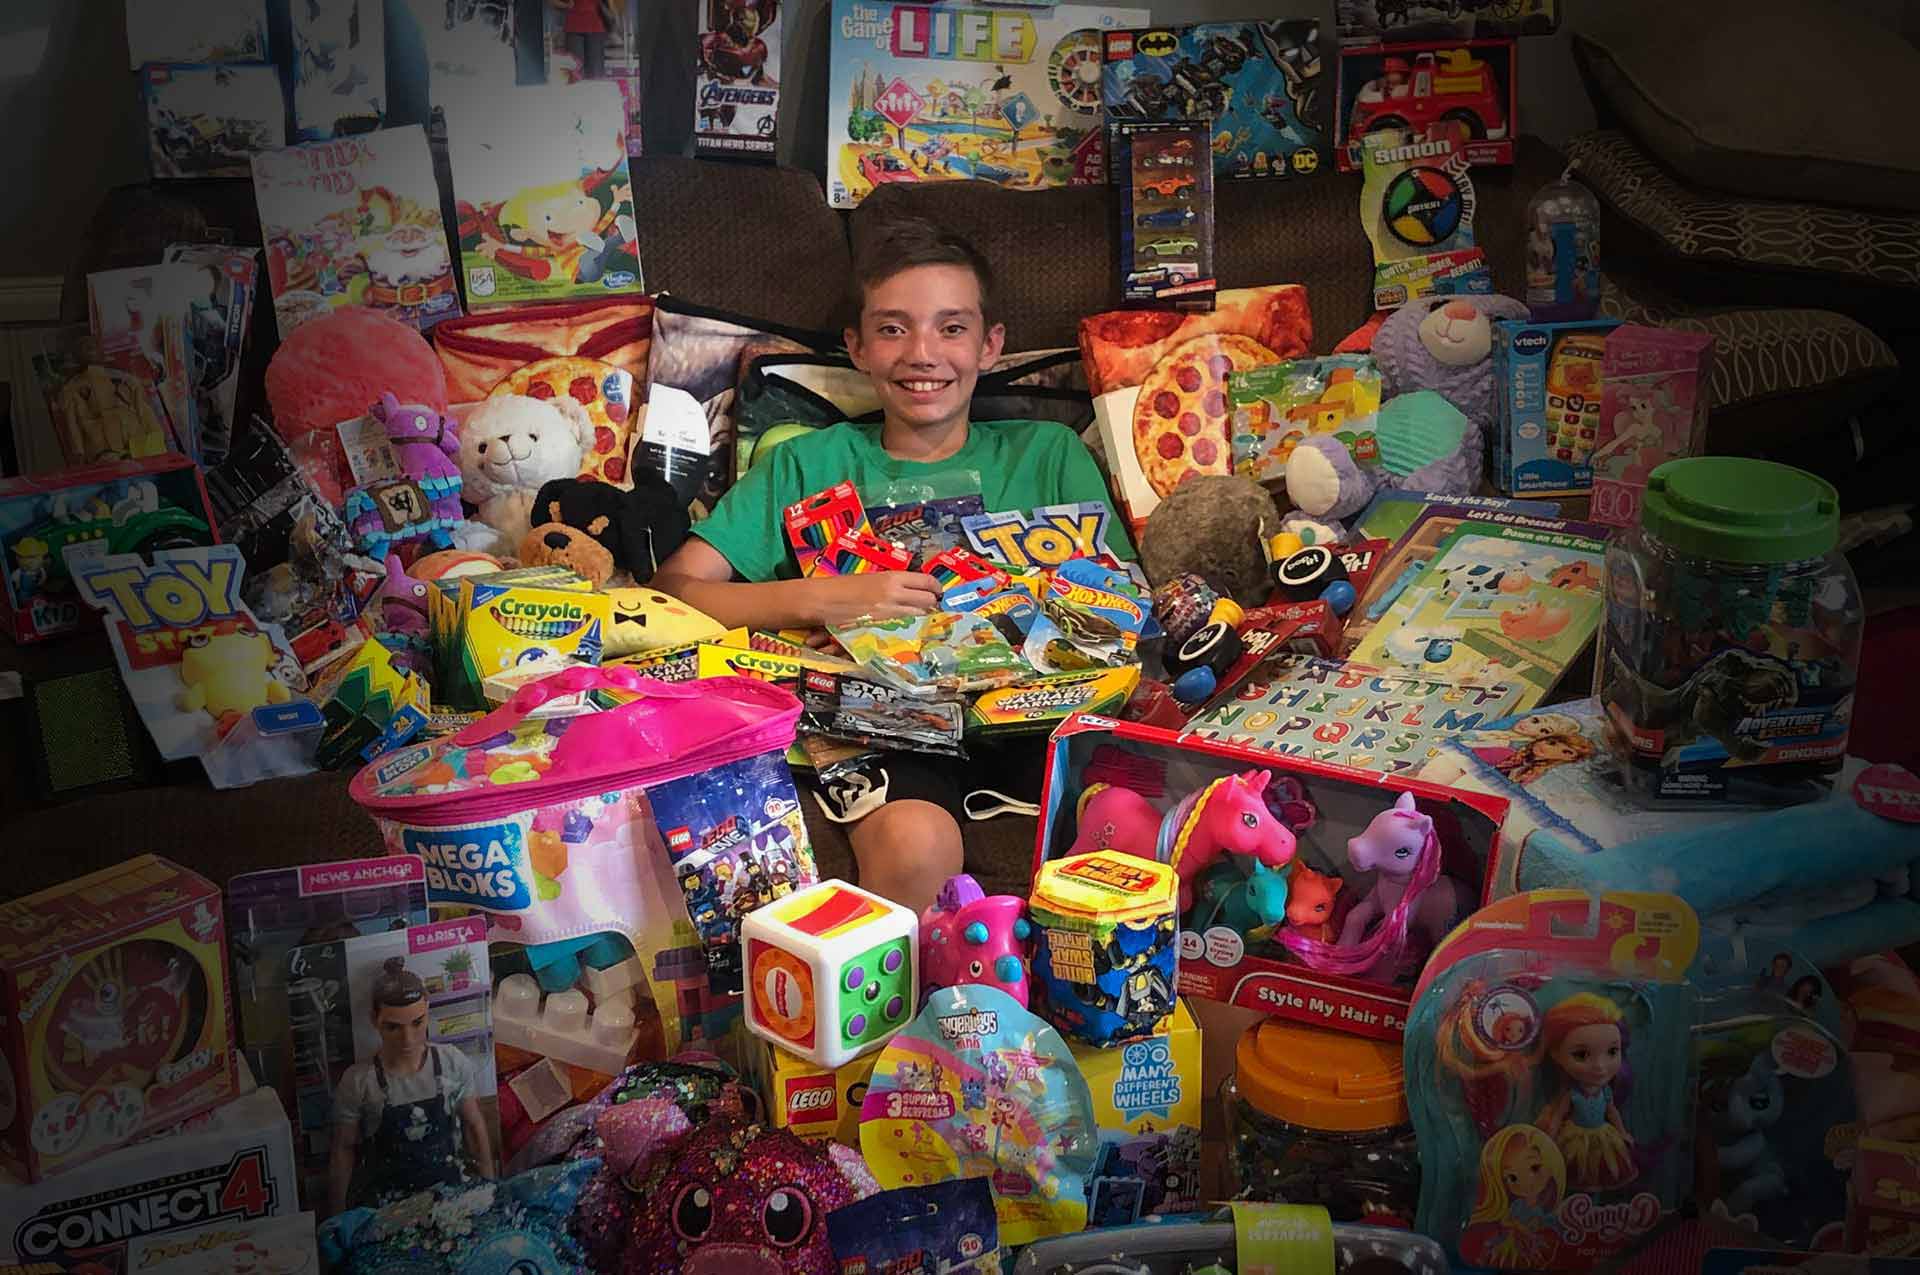 Jakob with his purchased gifts